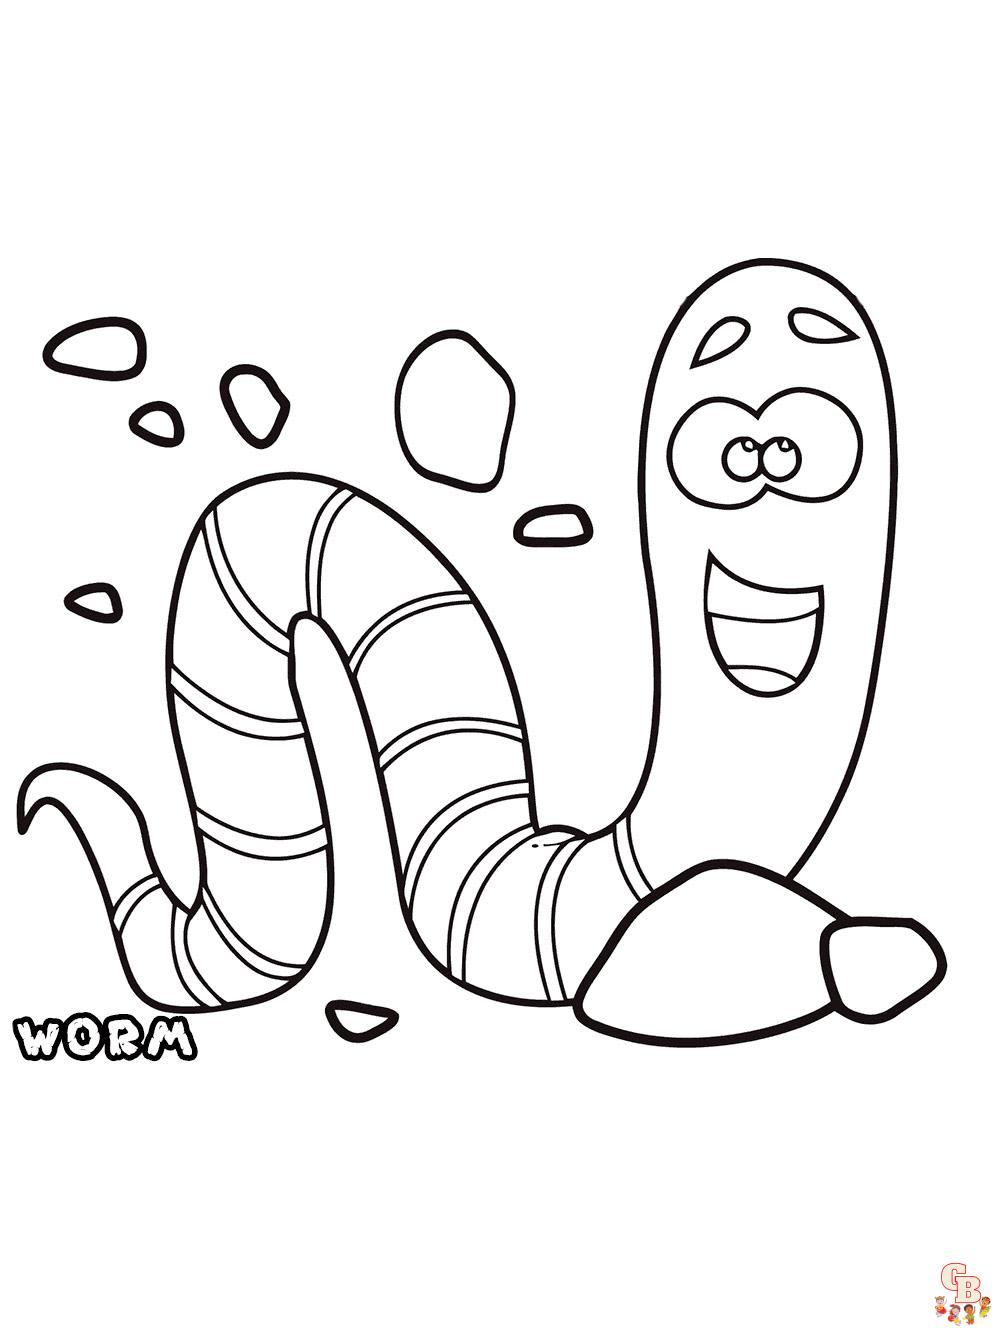 Worm Coloring Pages 25